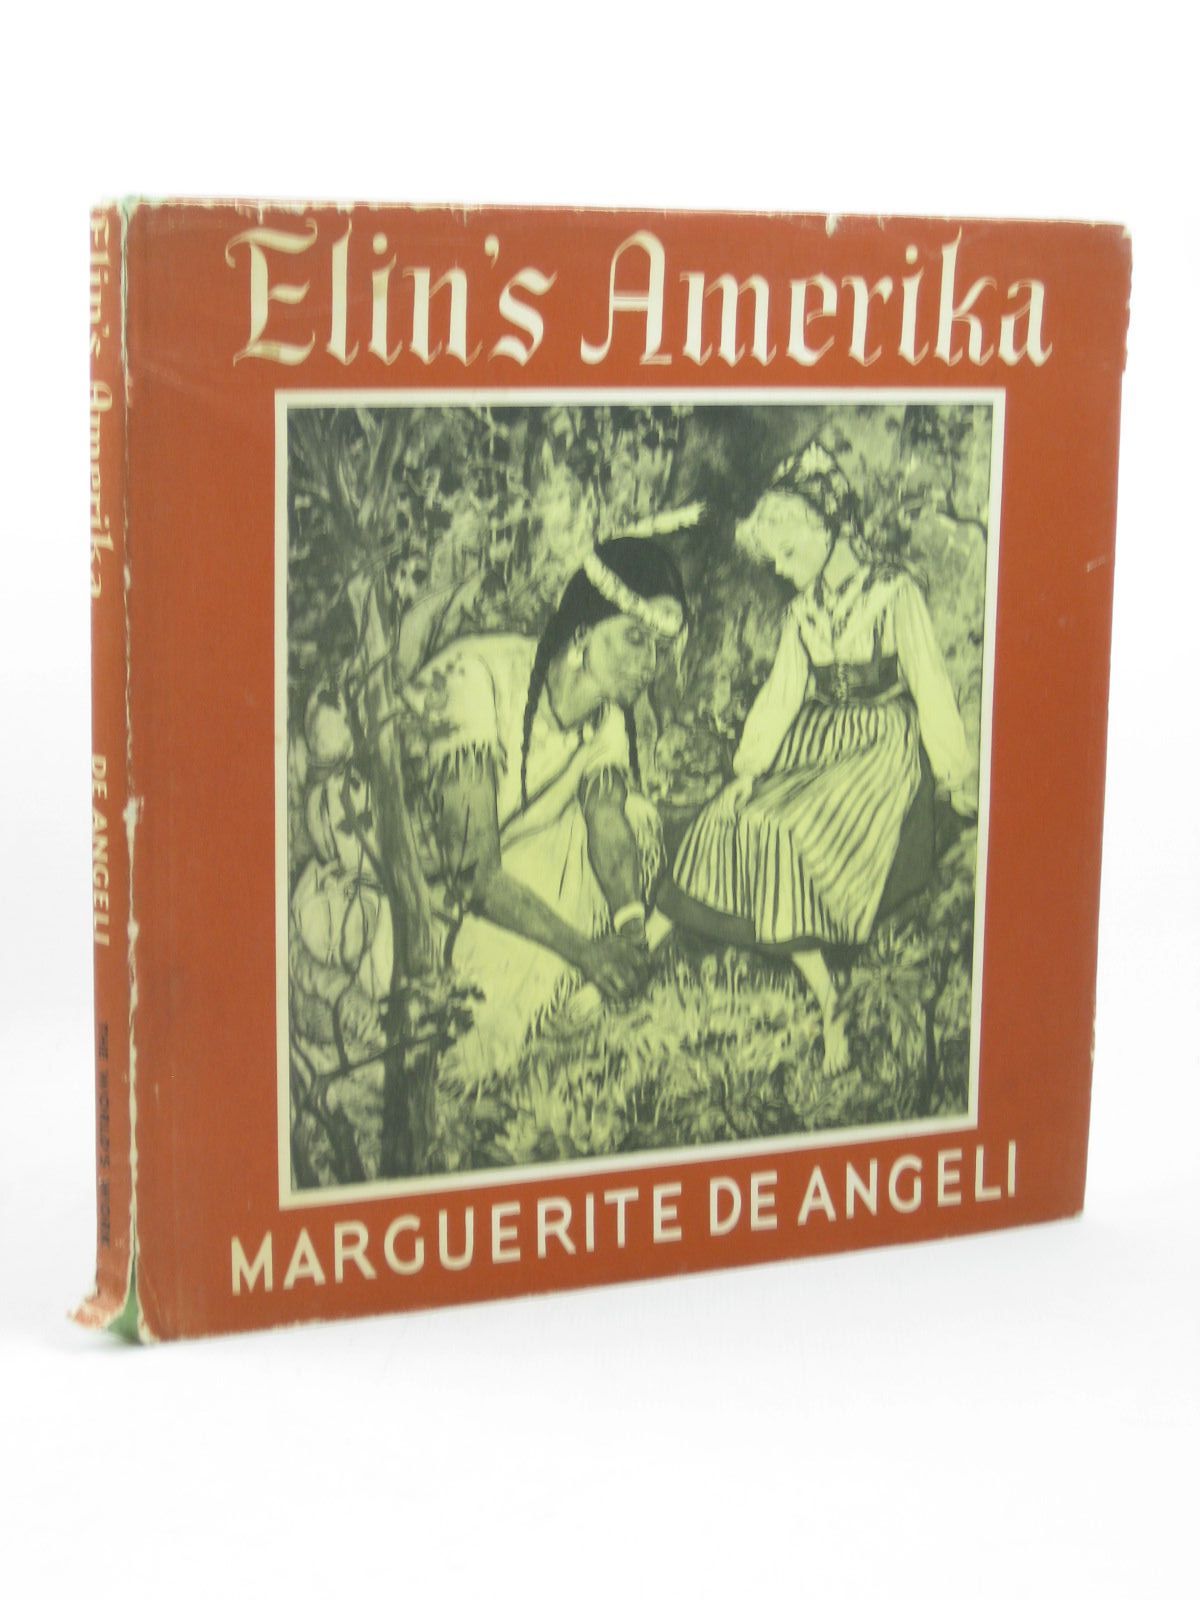 Cover of ELIN'S AMERIKA by Marguerite De Angeli